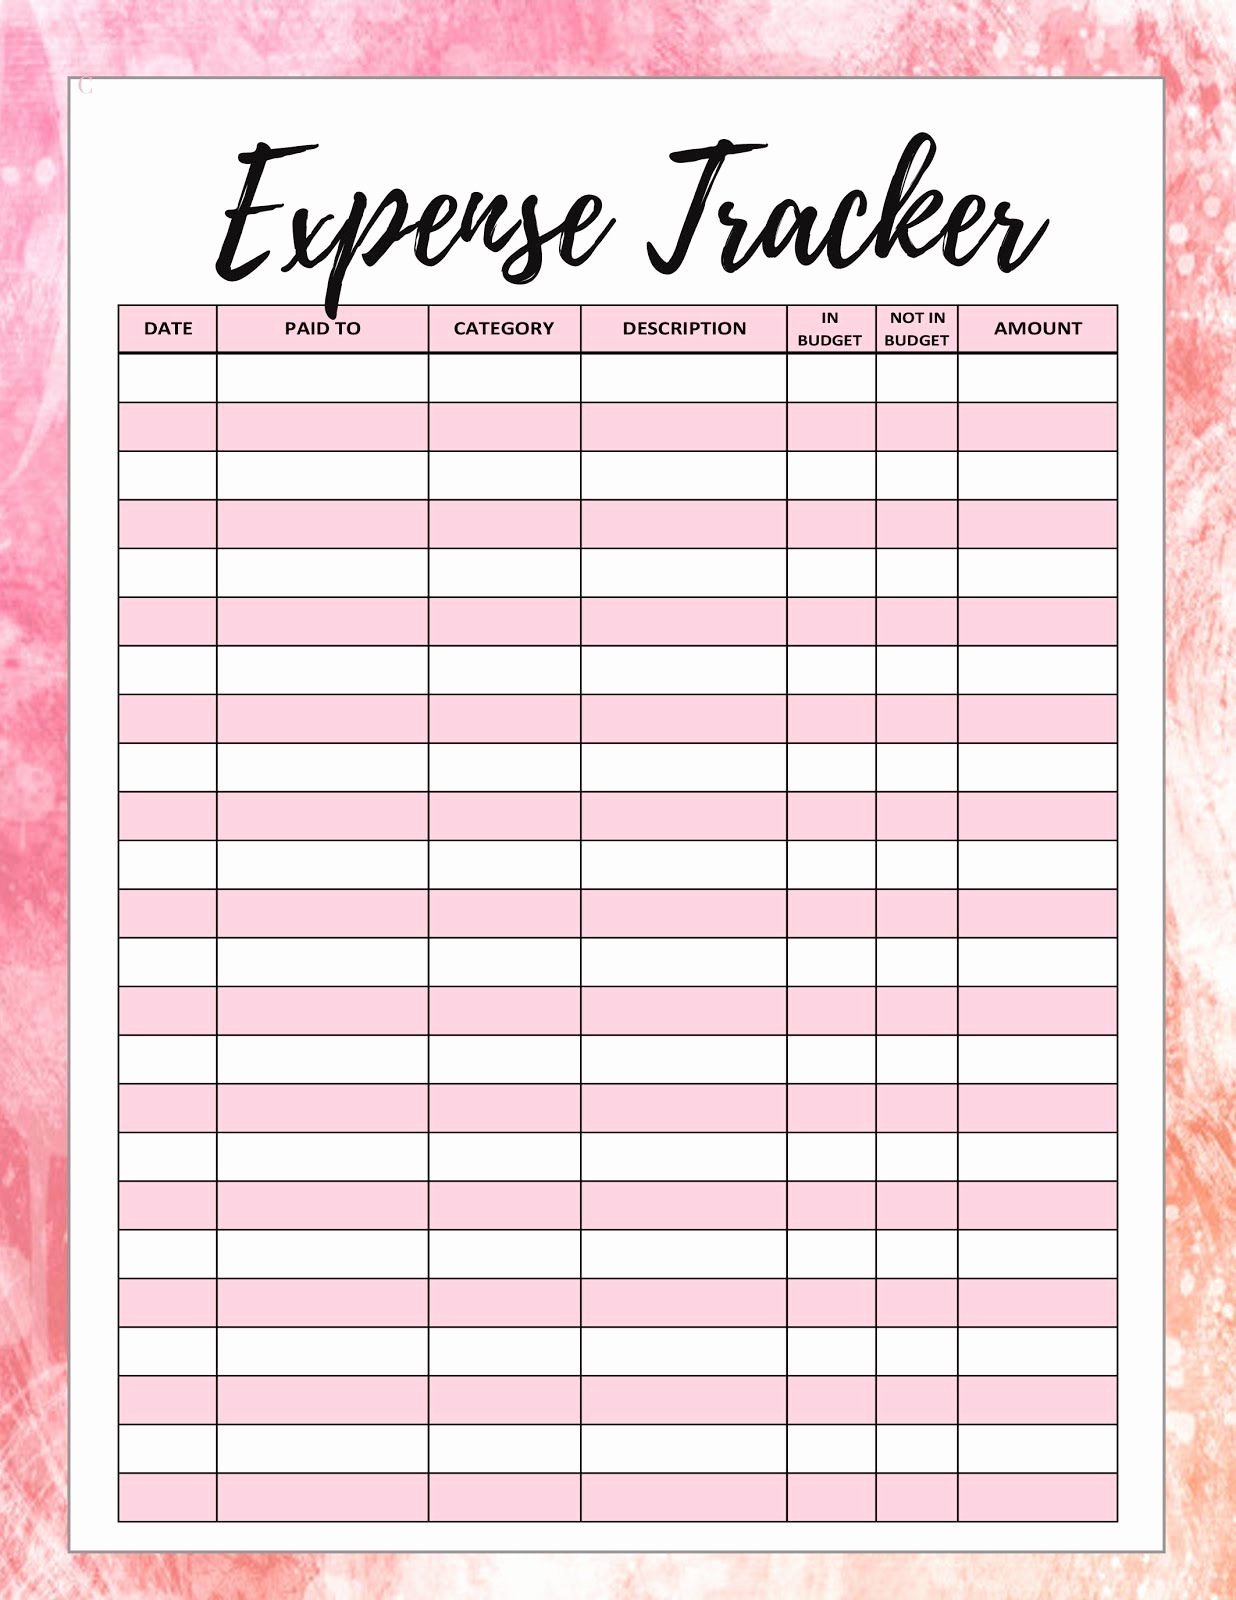 Budget Tracker Template Best Of Freebie Friday Printable Spending or Expense Tracker